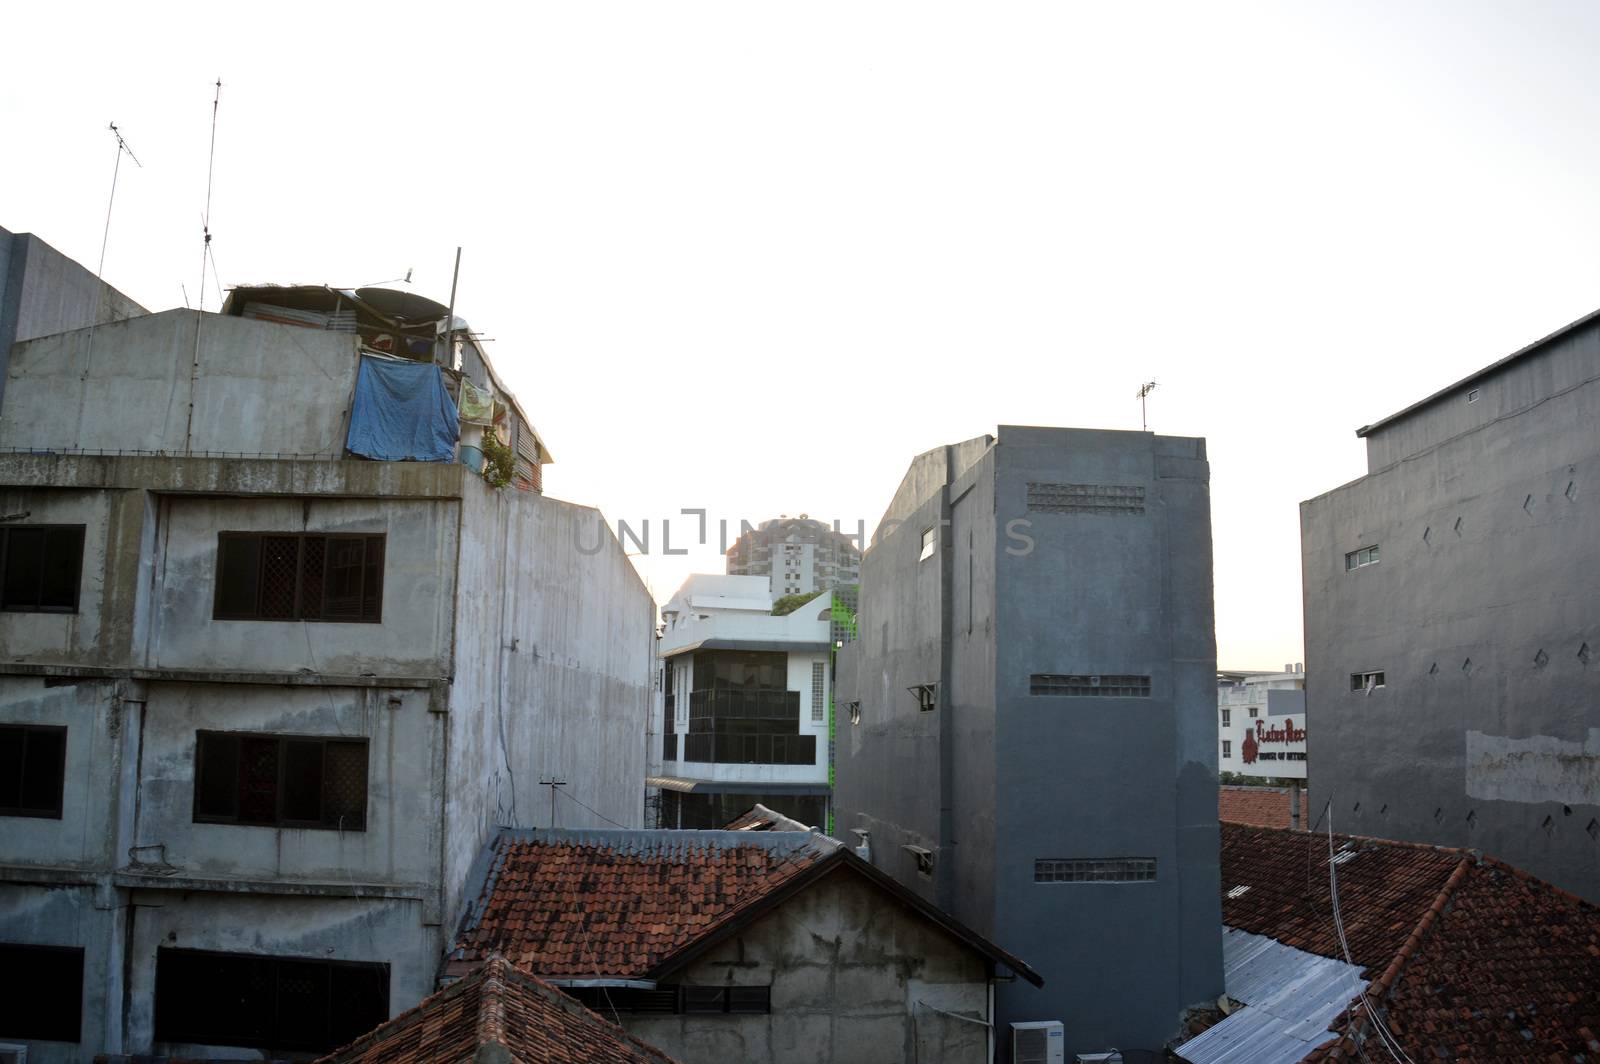 view of buildings at Jakarta, Indonesia